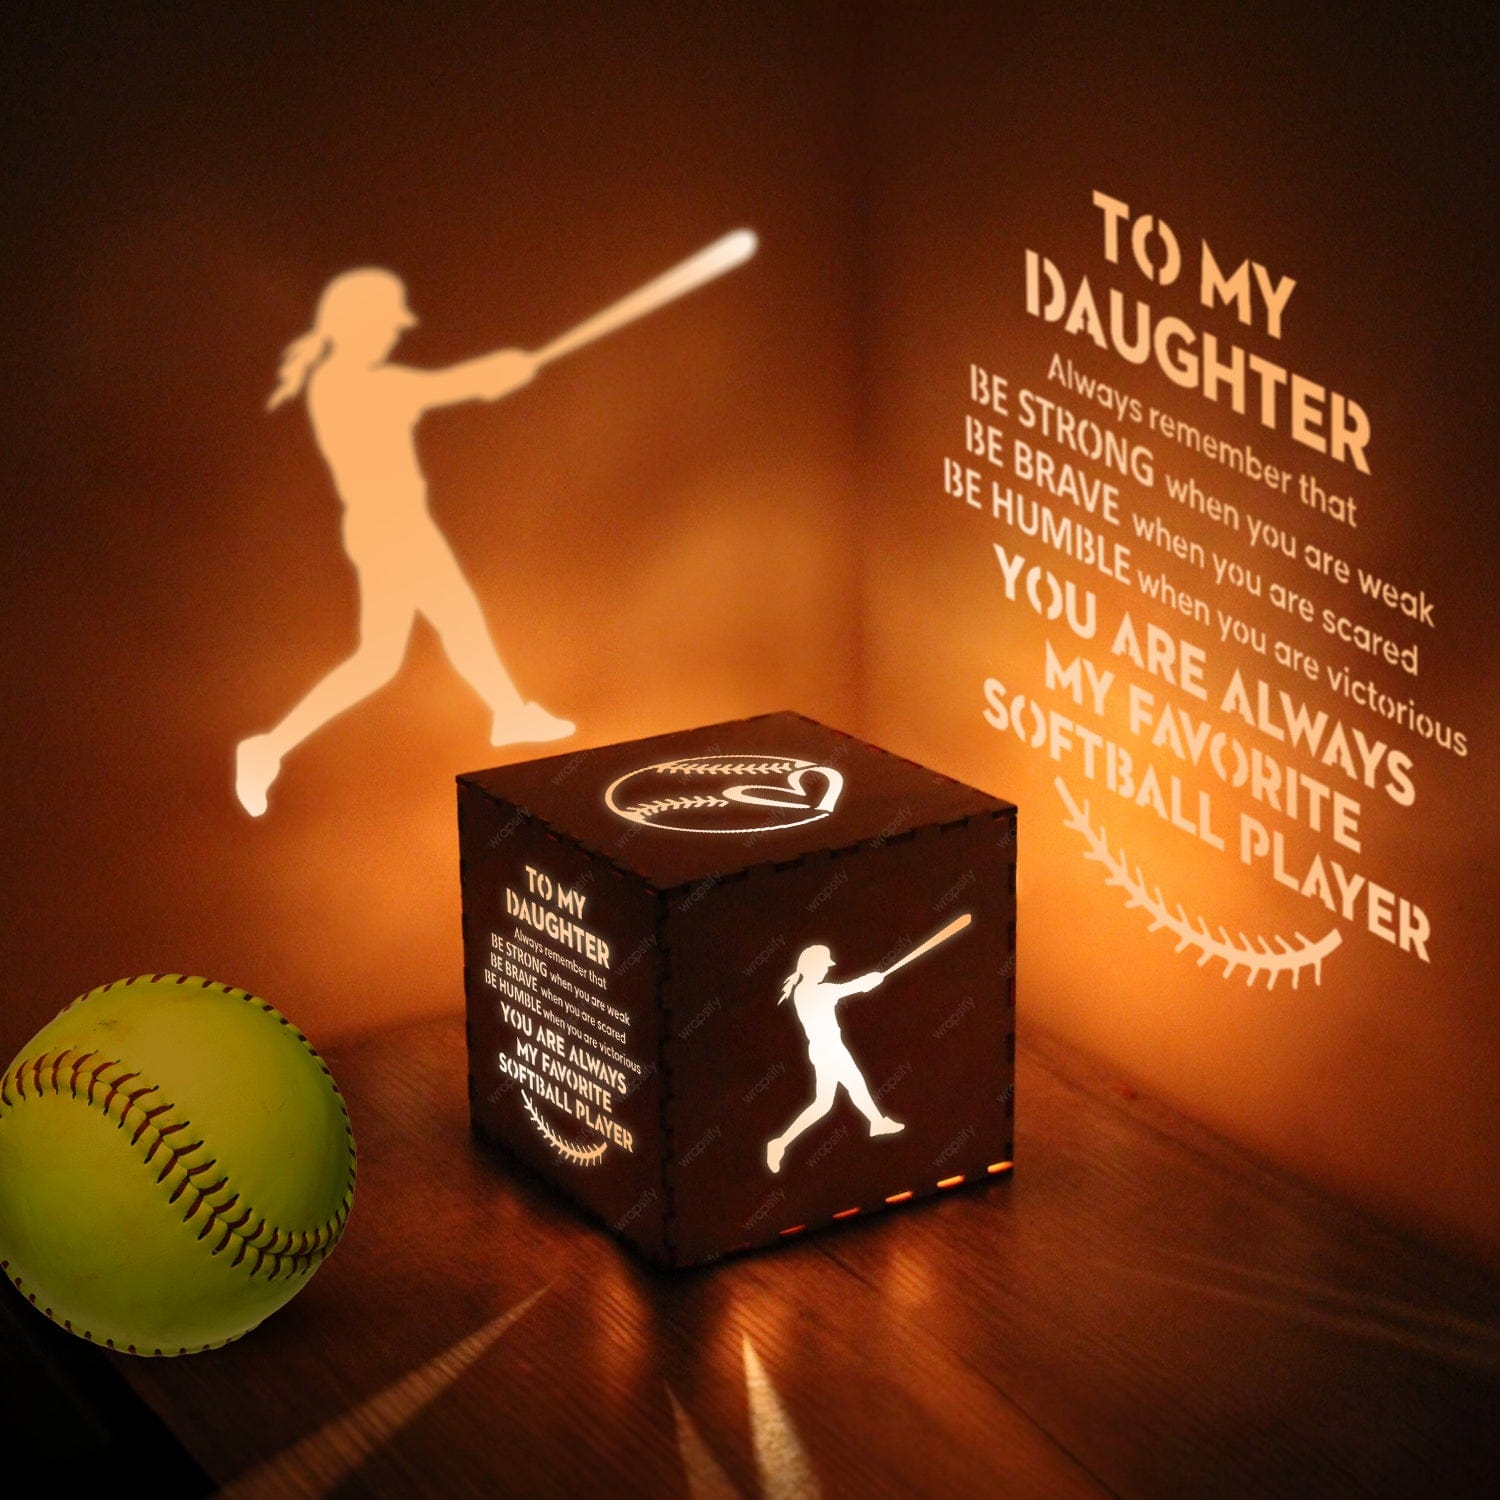 Light Up Message Box - Softball - To My Daughter - Be Strong When You Are Weak - Gyl17005